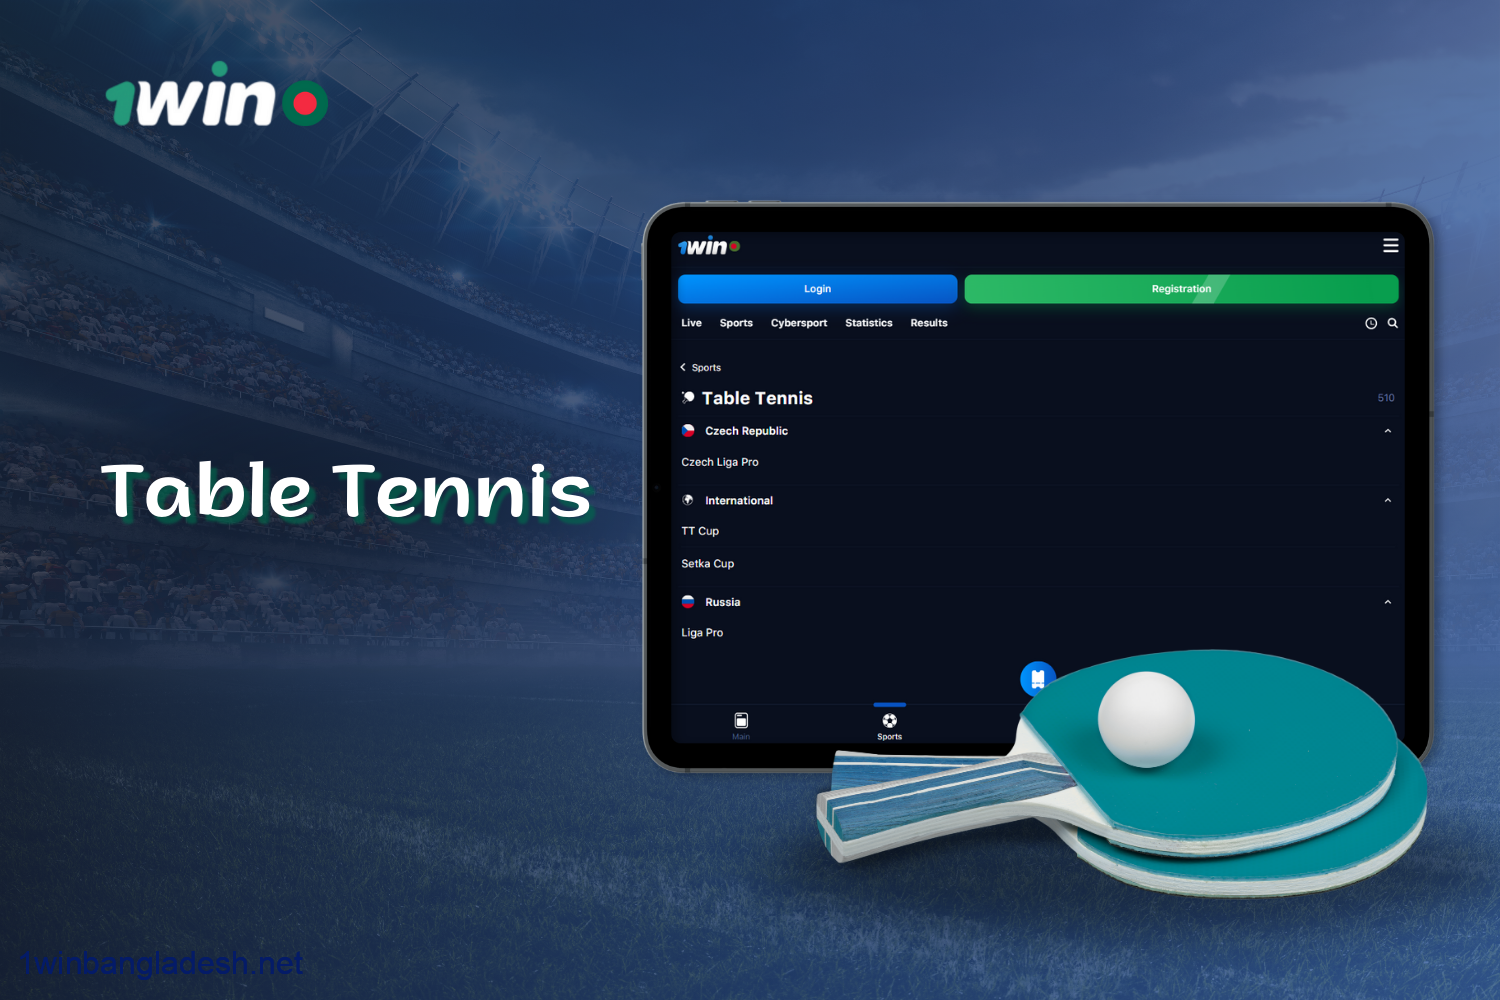 1win offers a wide range of Table Tennis betting options in the Sports section for players from Bangladesh